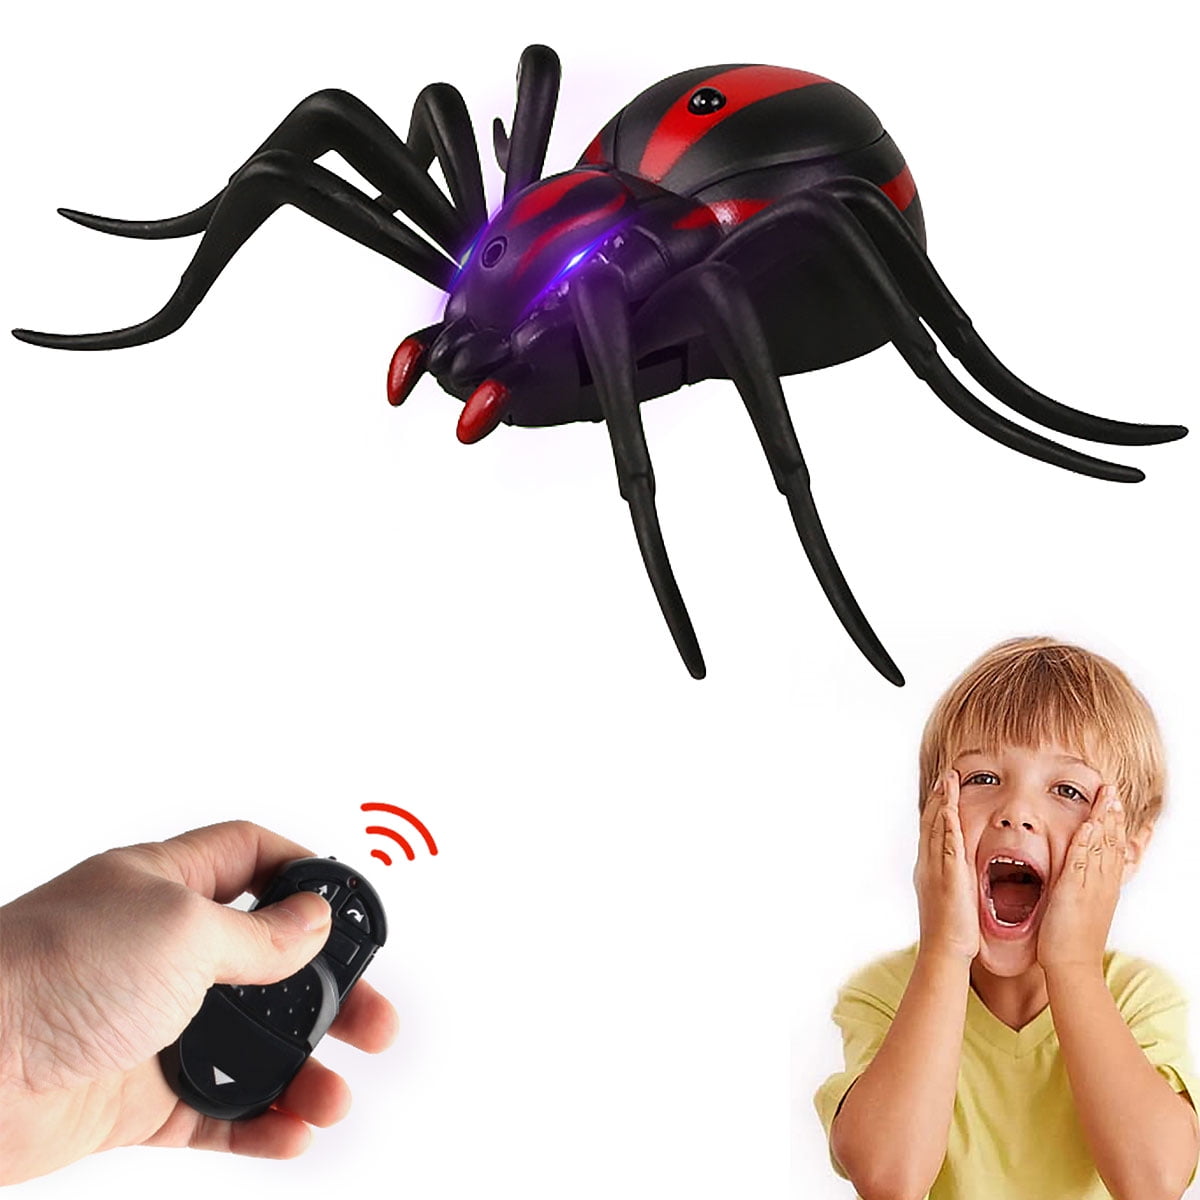 Zgifts Electronic Realistic Animal Scorpion RC Wireless Infrared Remote Control Prank Insect Scary Trick Animal Toy Adult Children Kids Girls Gift For Christmas Halloween,Red 